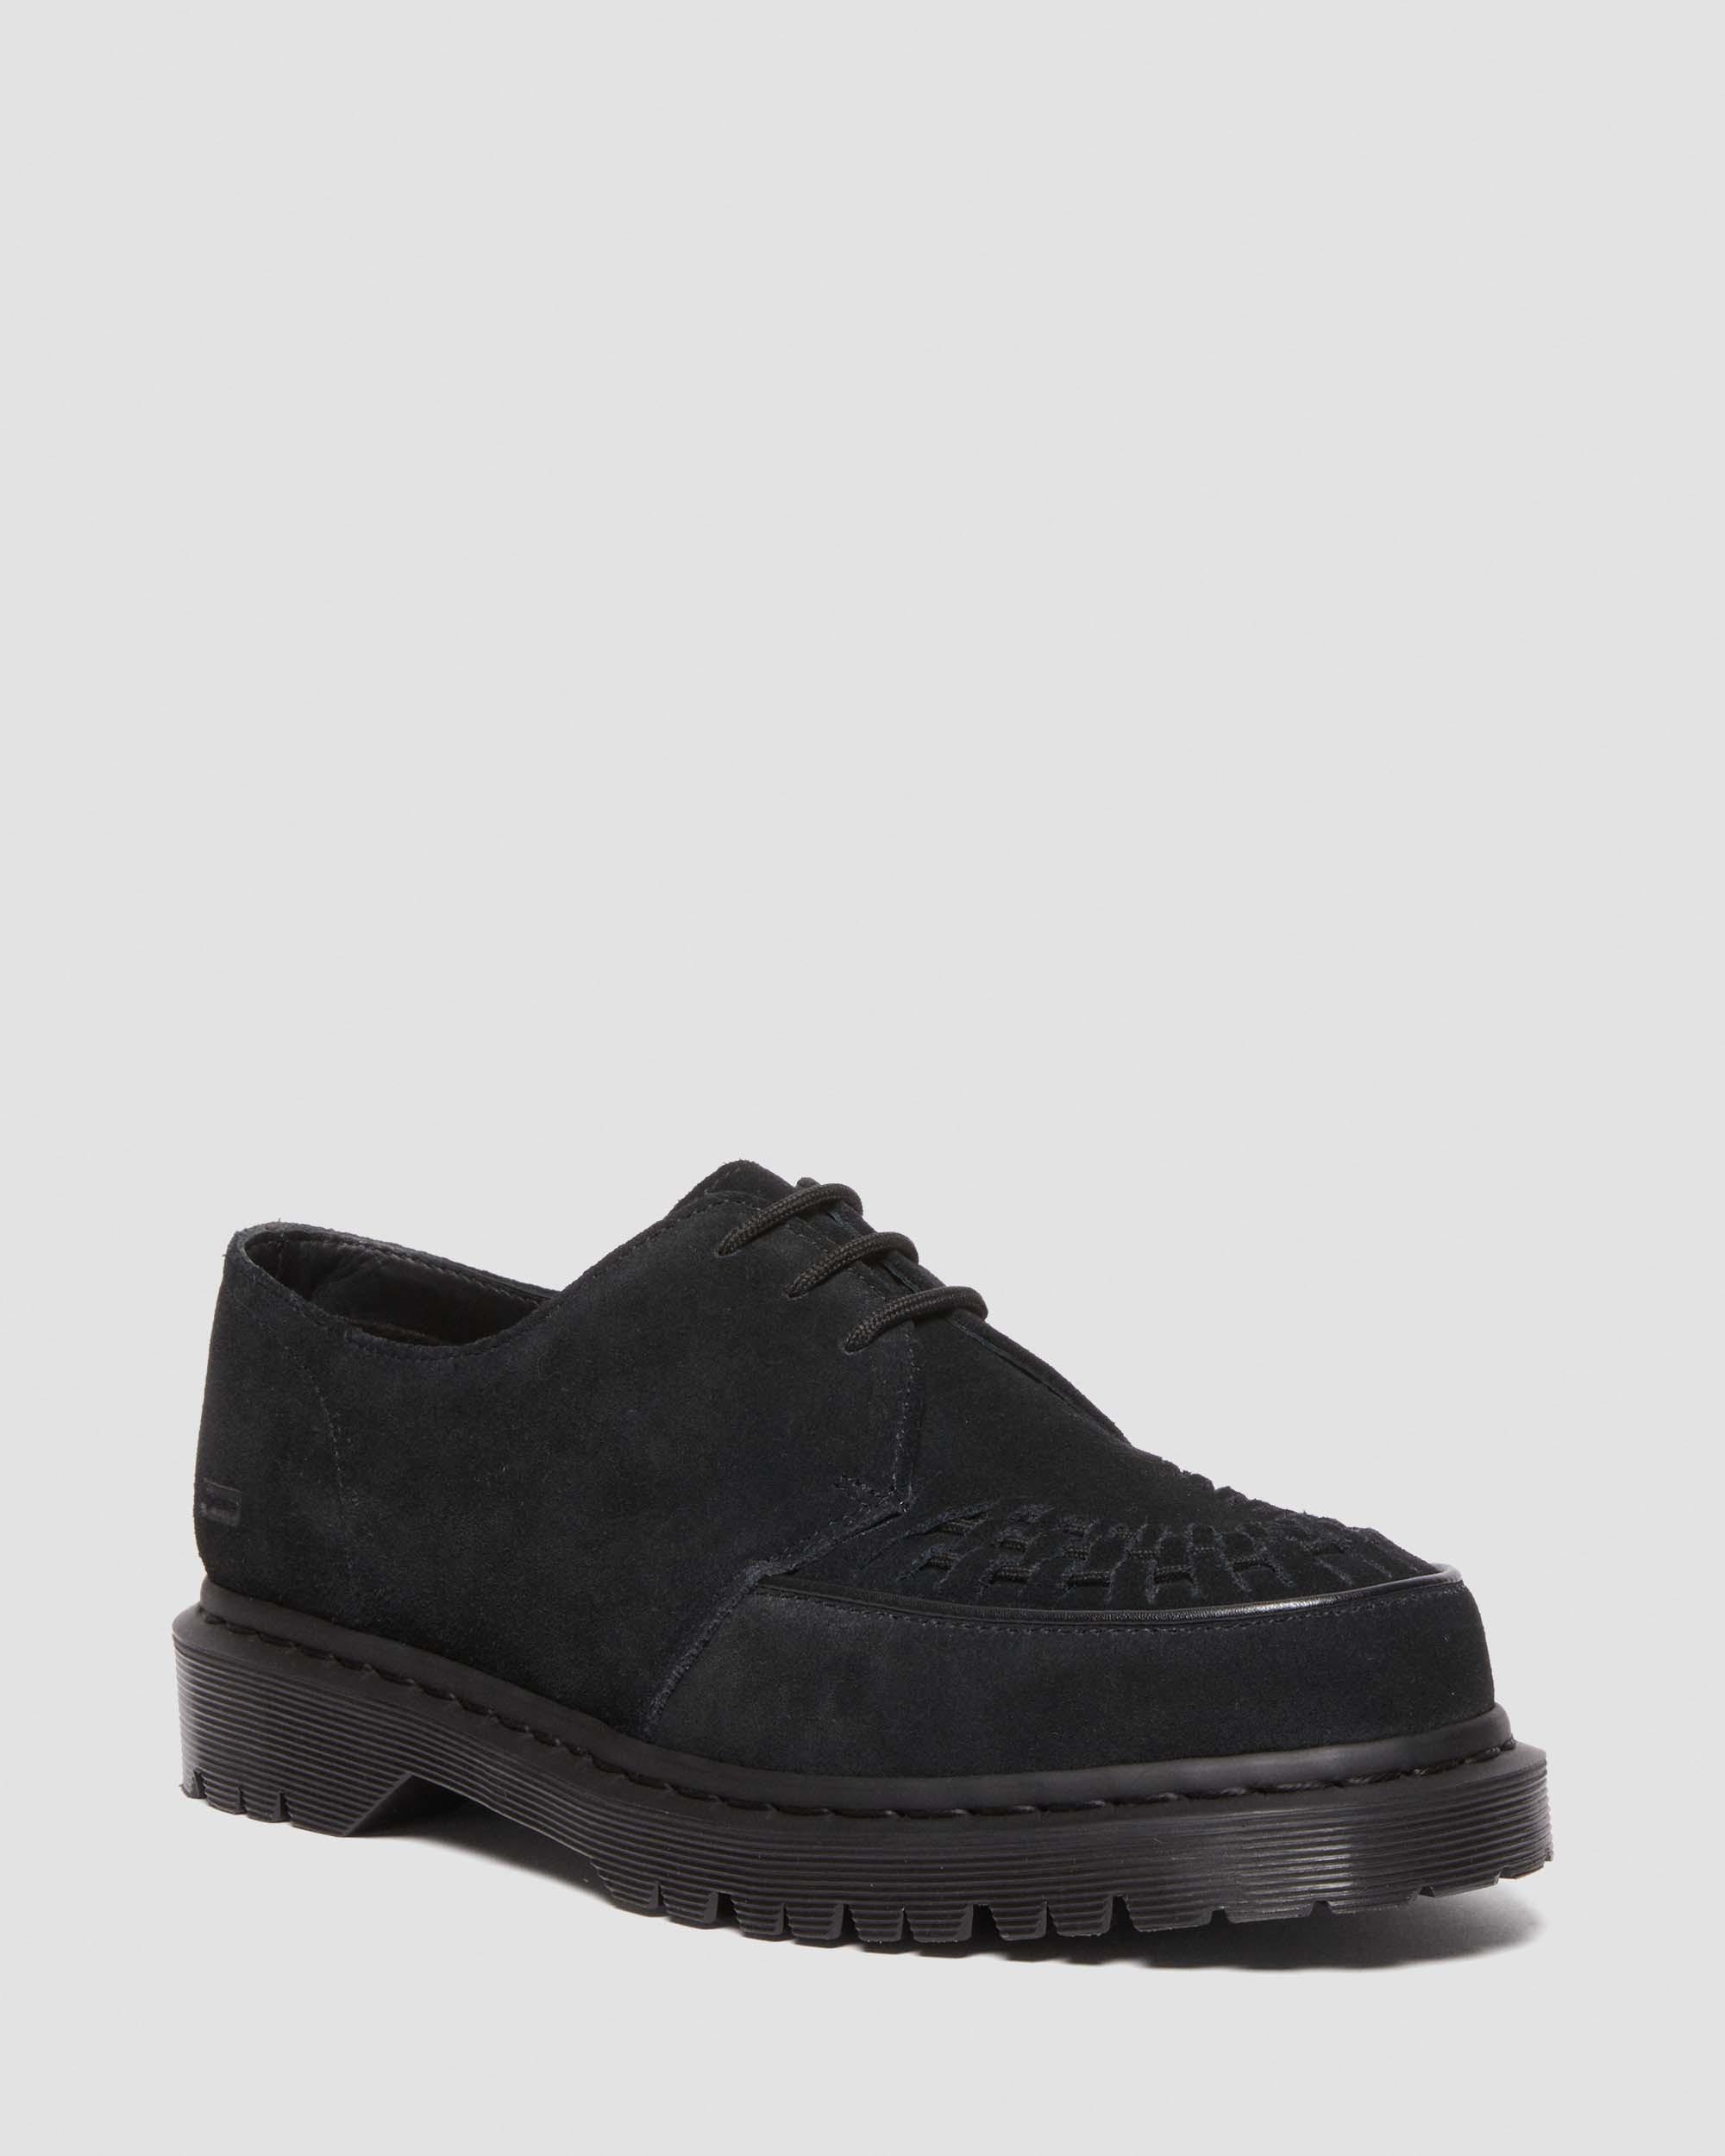 Ramsey Supreme Suede Creepers in Black | Dr. Martens